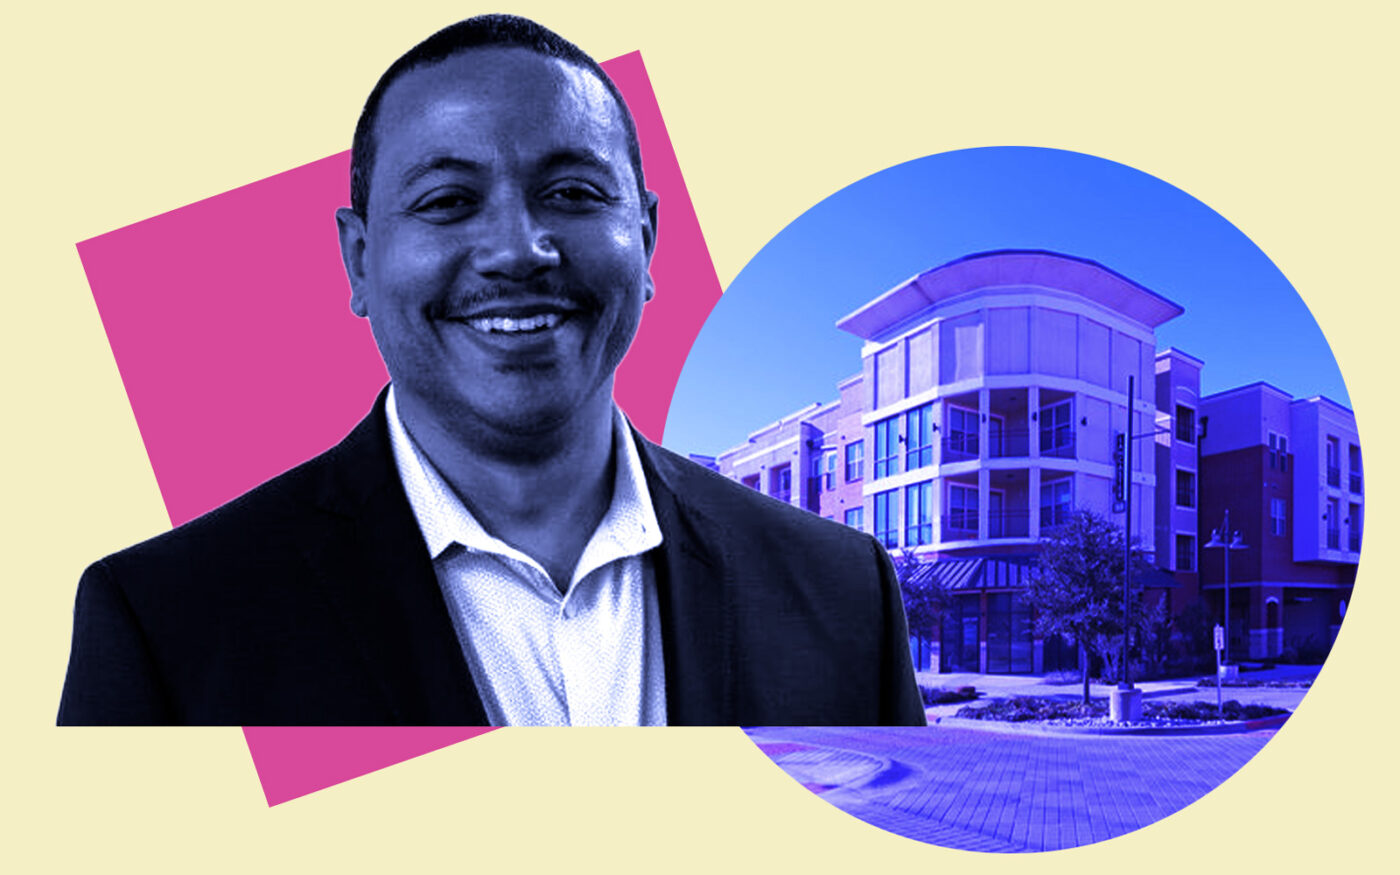 David Noguera of Dallas’s Housing and Neighborhood Services Department and Lancaster Urban Village Apartments